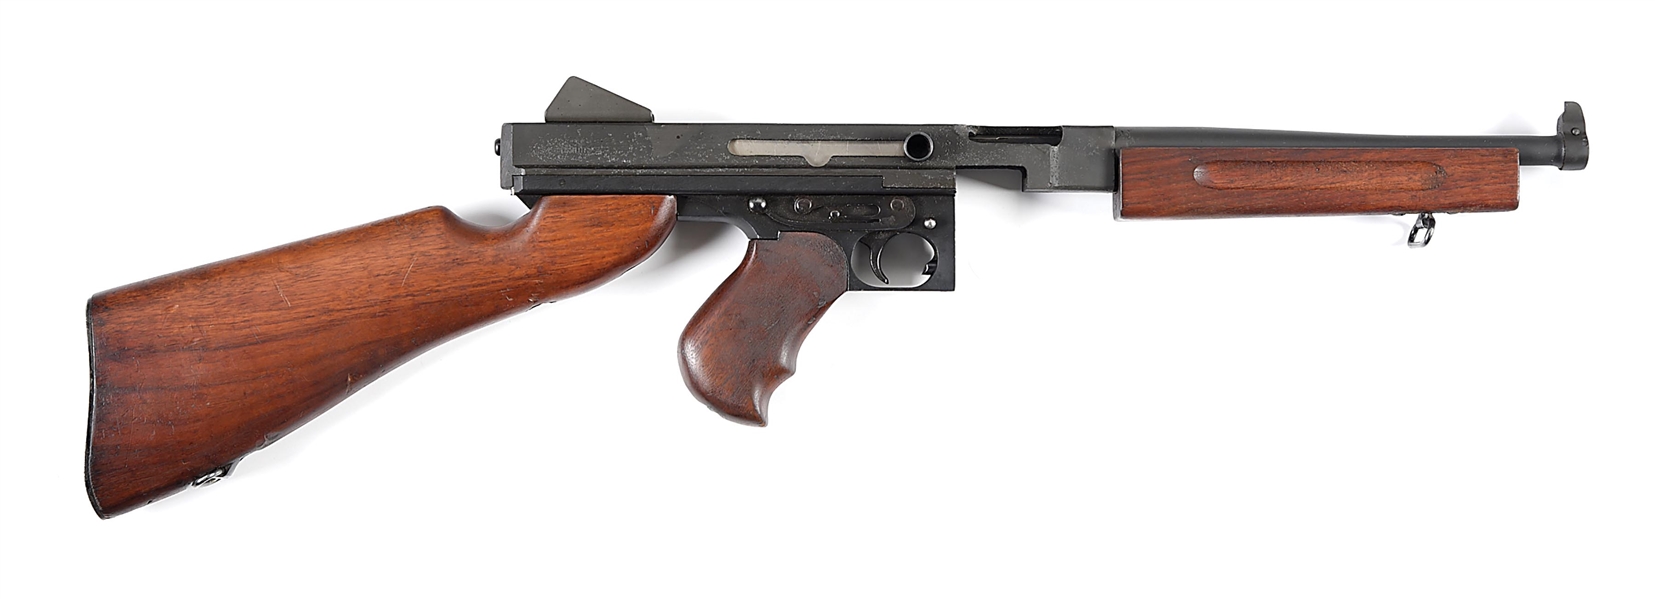 (N) IRS NUMBER REGISTERED M1 THOMPSON MACHINE GUN WITH ORIGINAL HAMMER-FIRED FIRING PIN (CURIO & RELIC).